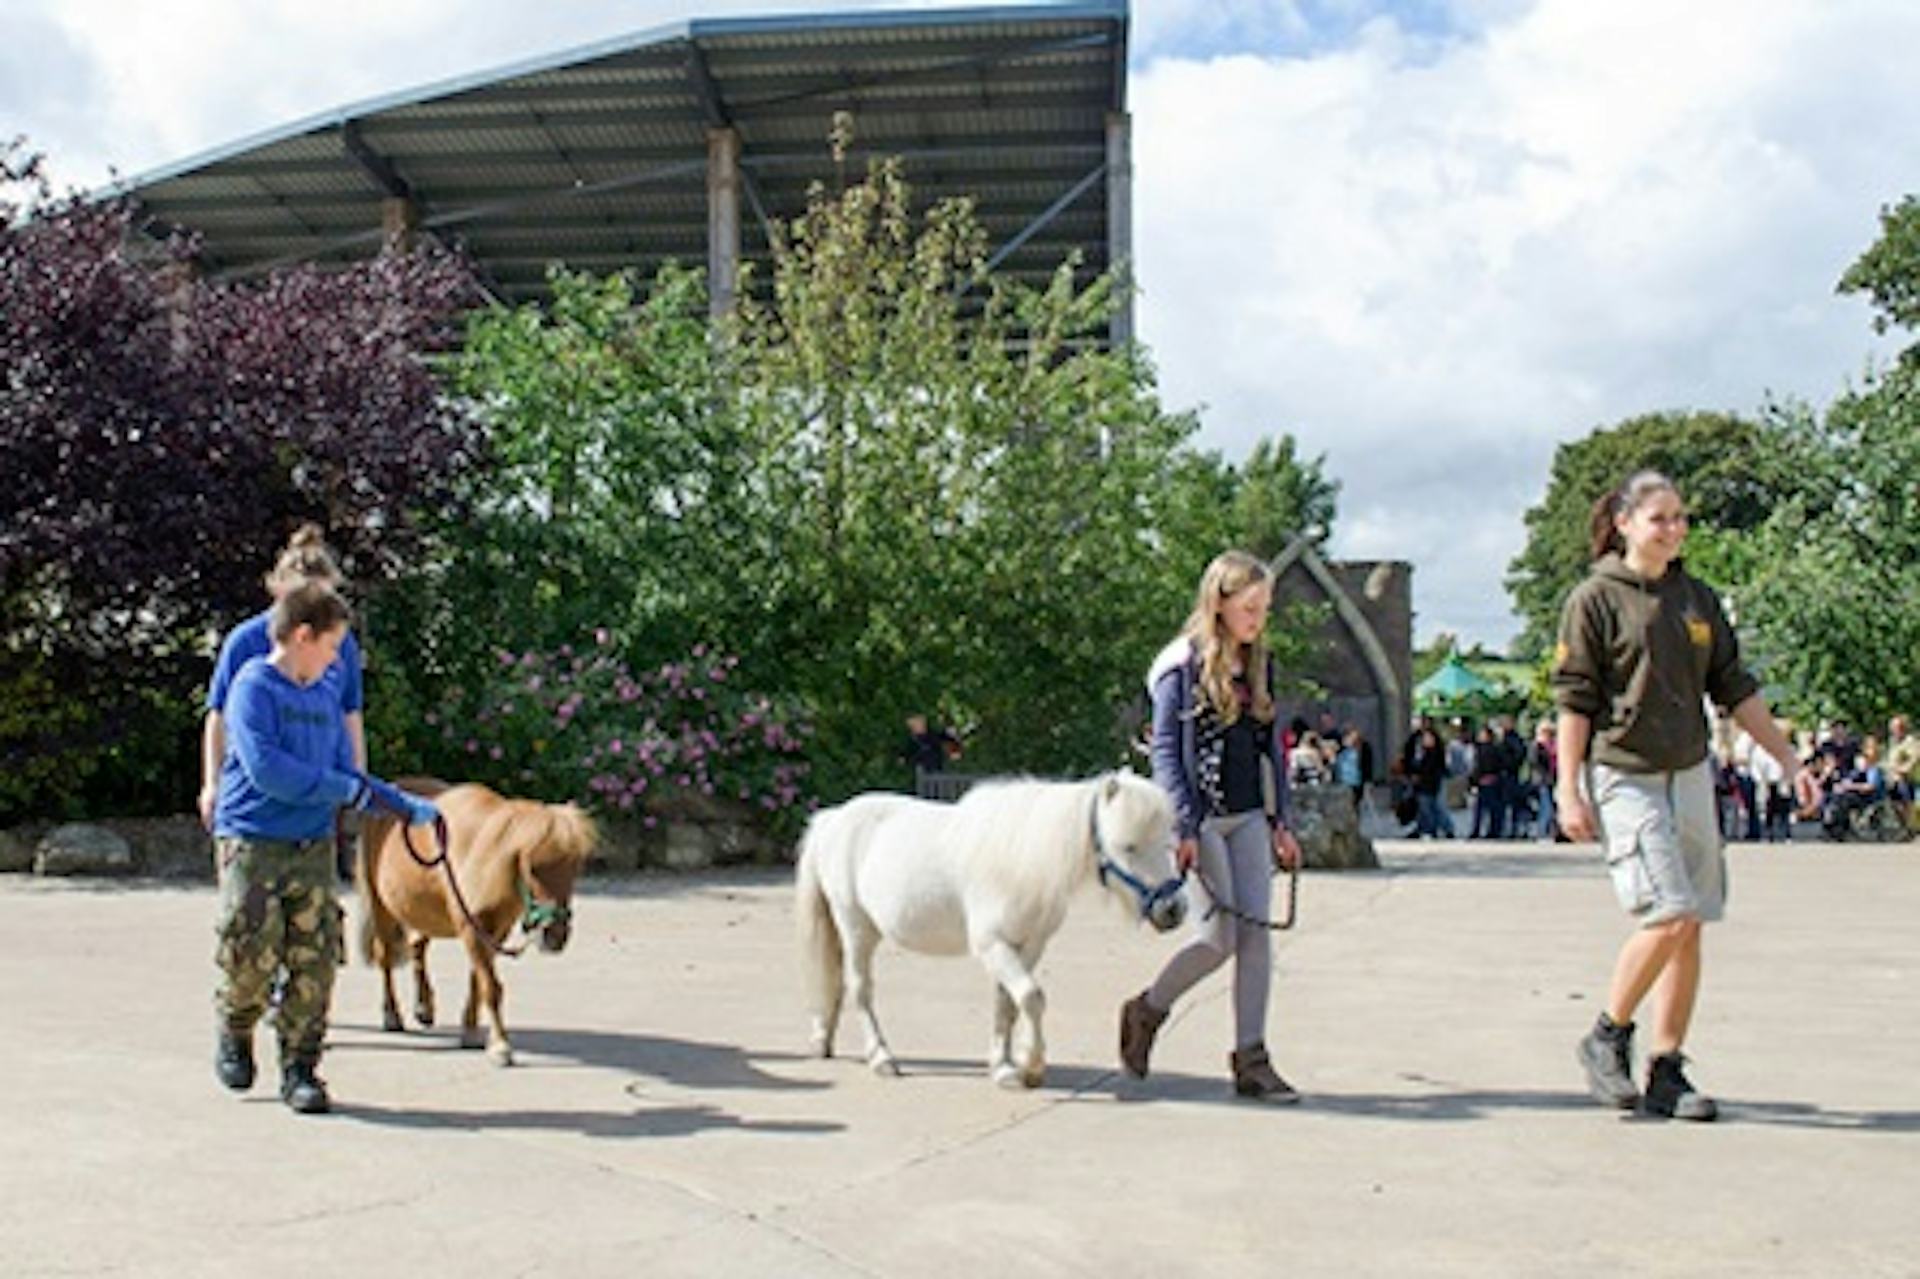 Be a Zoo Keeper for the Day at Flamingo Land Zoo